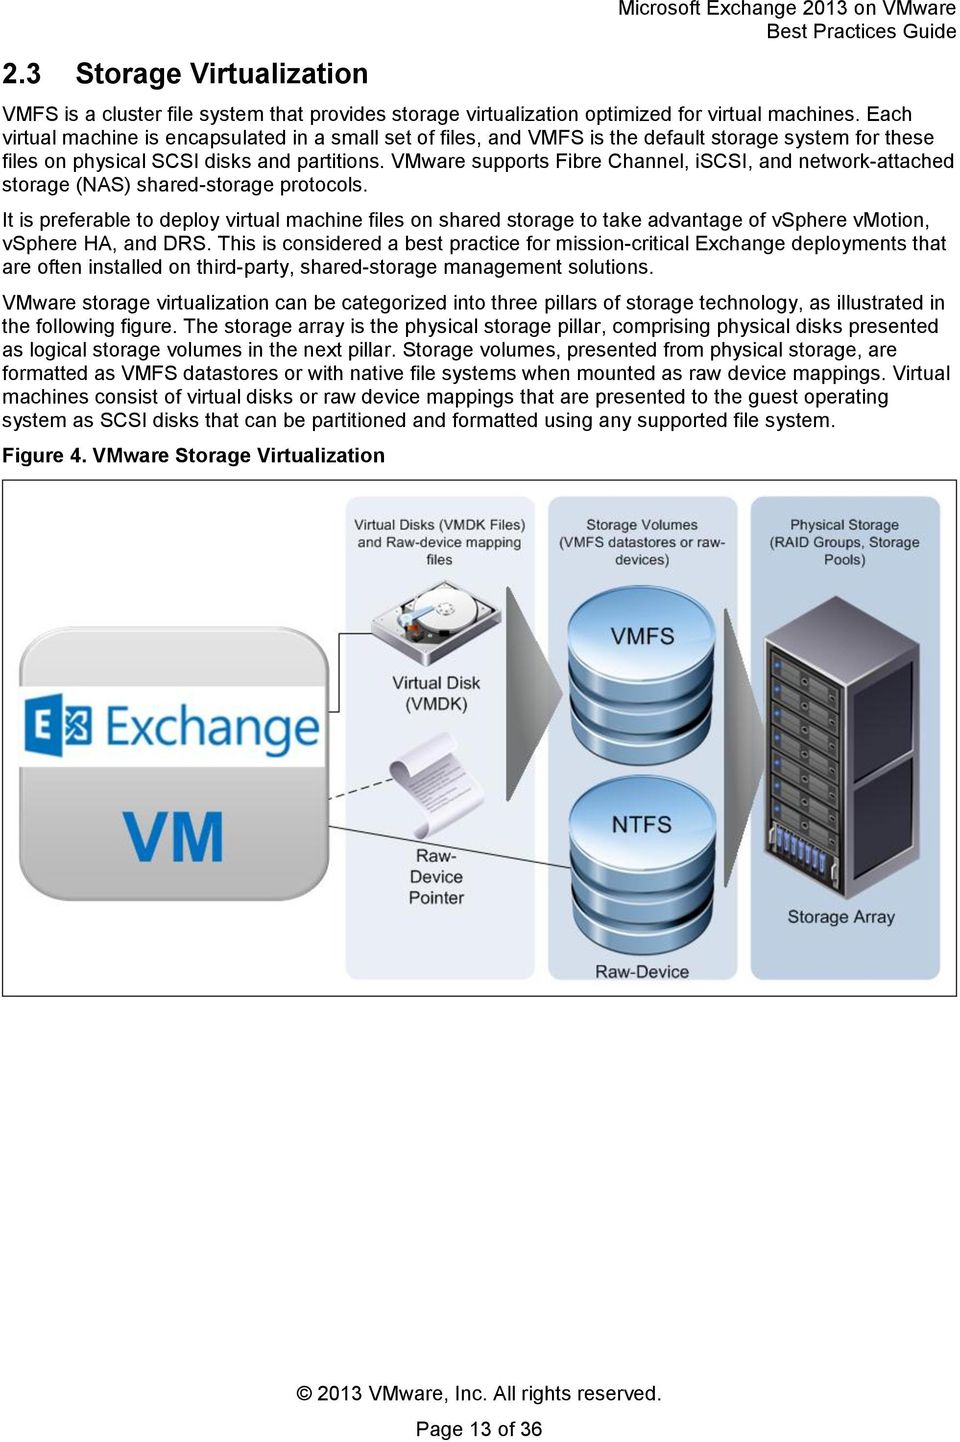 VMware supports Fibre Channel, iscsi, and network-attached storage (NAS) shared-storage protocols.